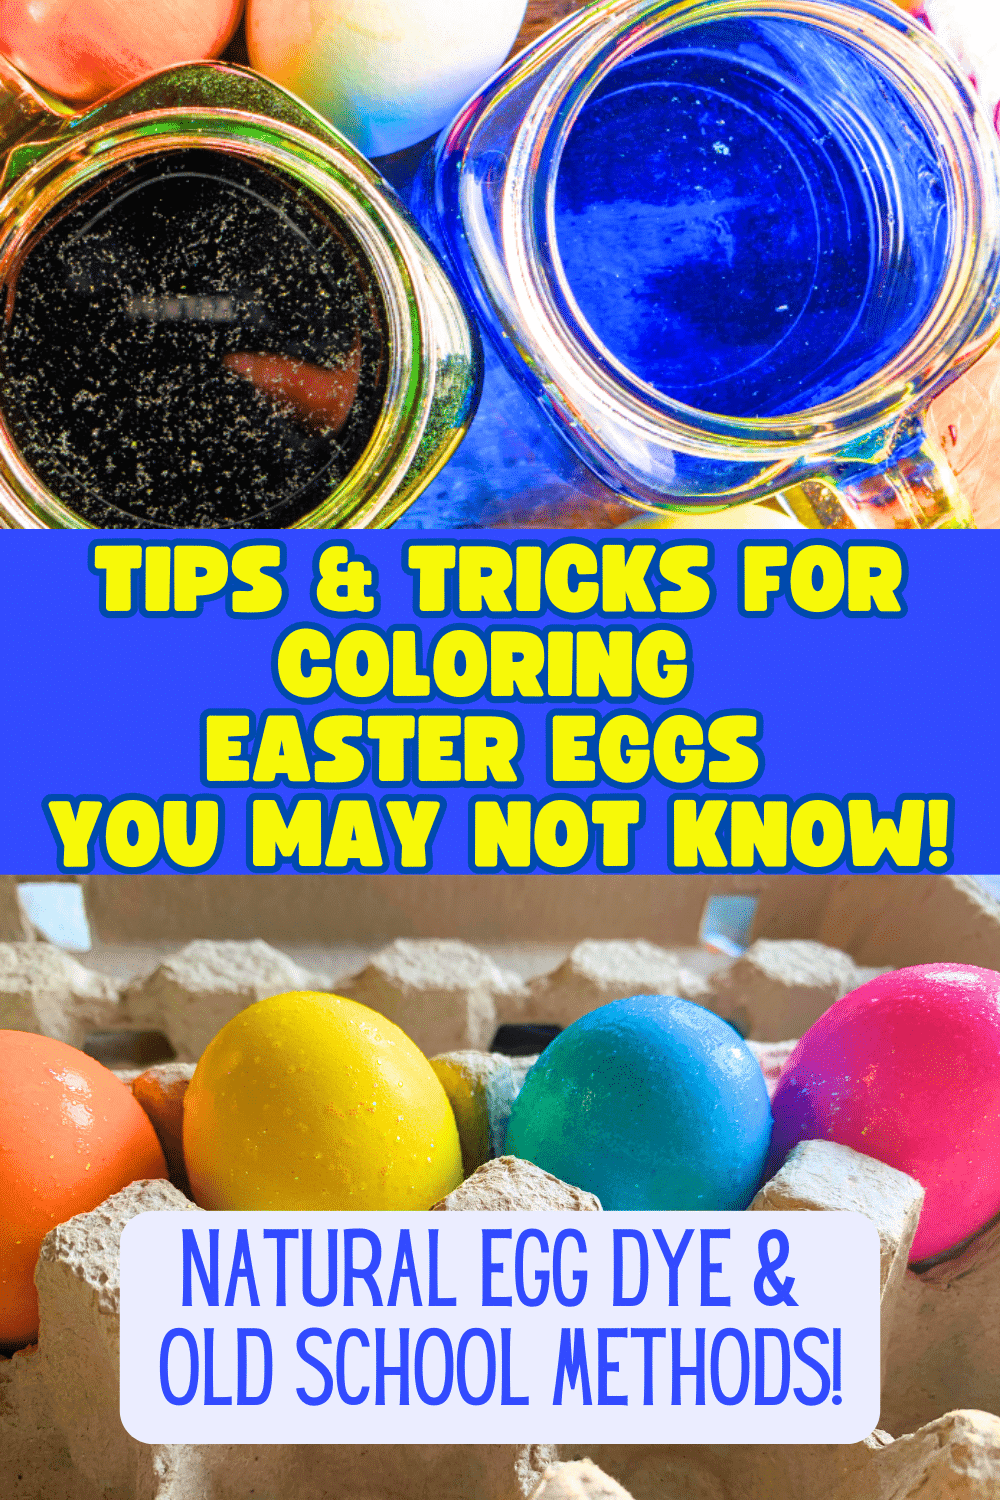 How To Color Easter Eggs Different Ways To Decorate Eggs - TEXT OVER DIFFERENT METHODS OF DYEING EASTER EGGS